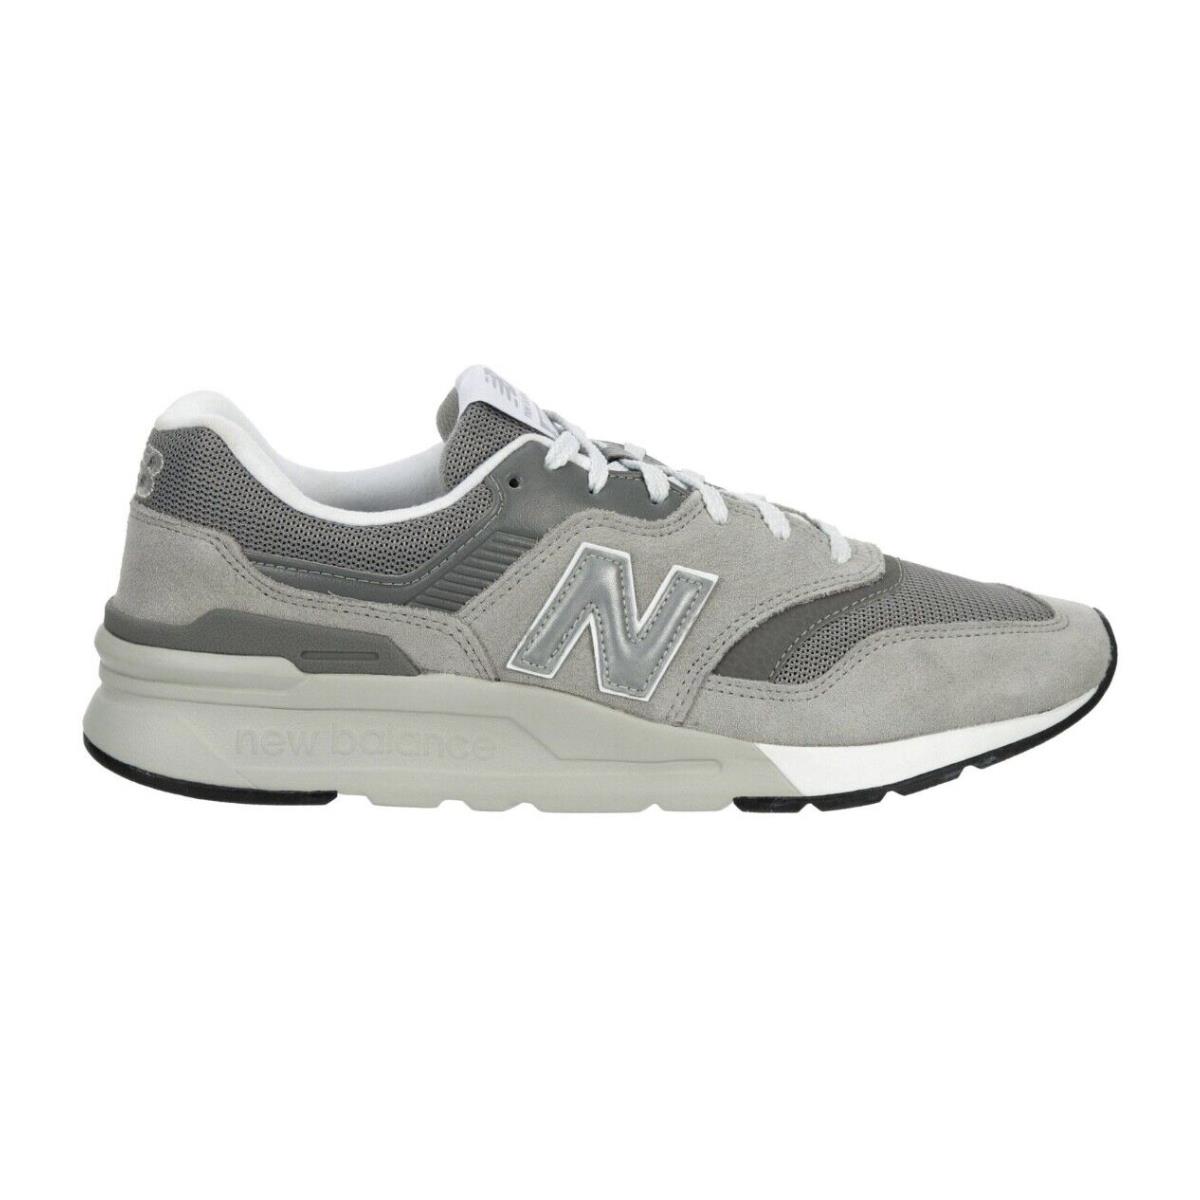 New Balance 997H Cordura Men`s Suede Athletic Running Casual Fashion Shoes Light Gray/Gray